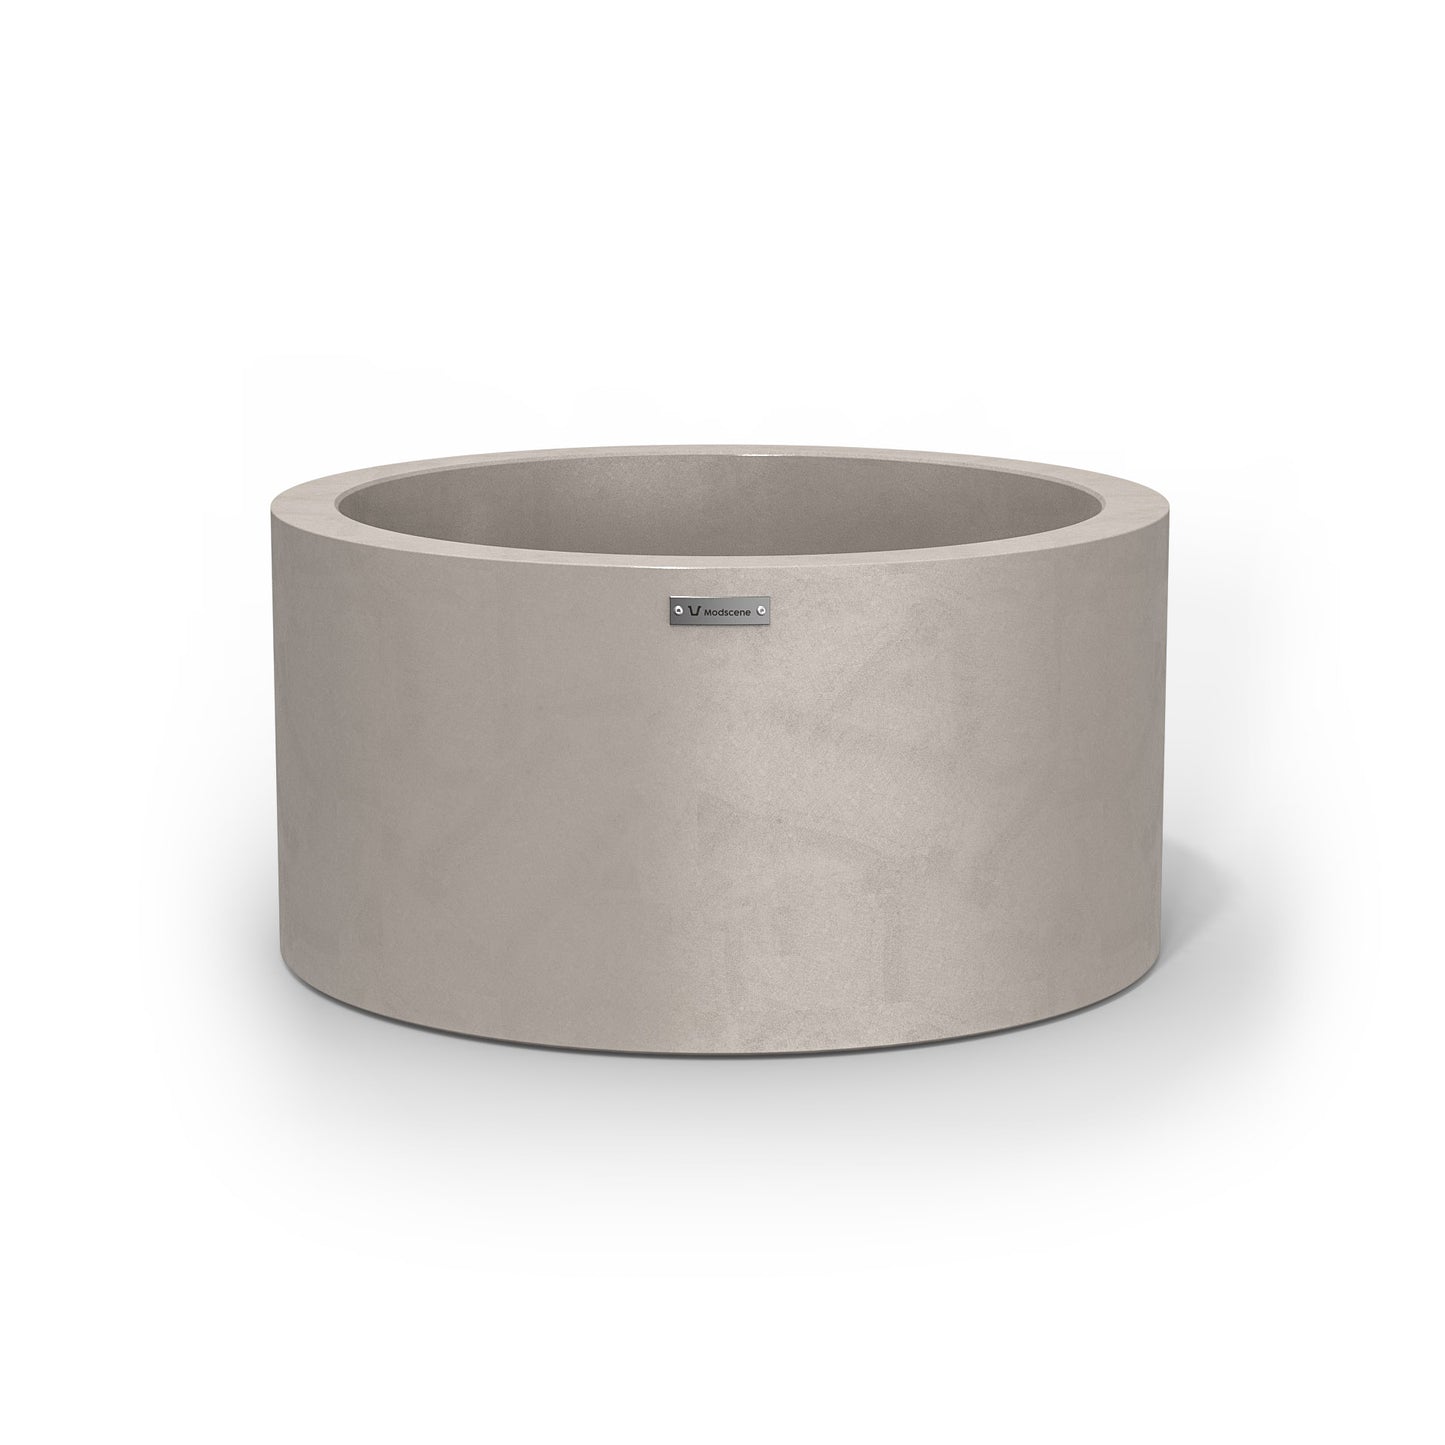 A cylinder pot planter in a sand stone colour with a concrete look finish.